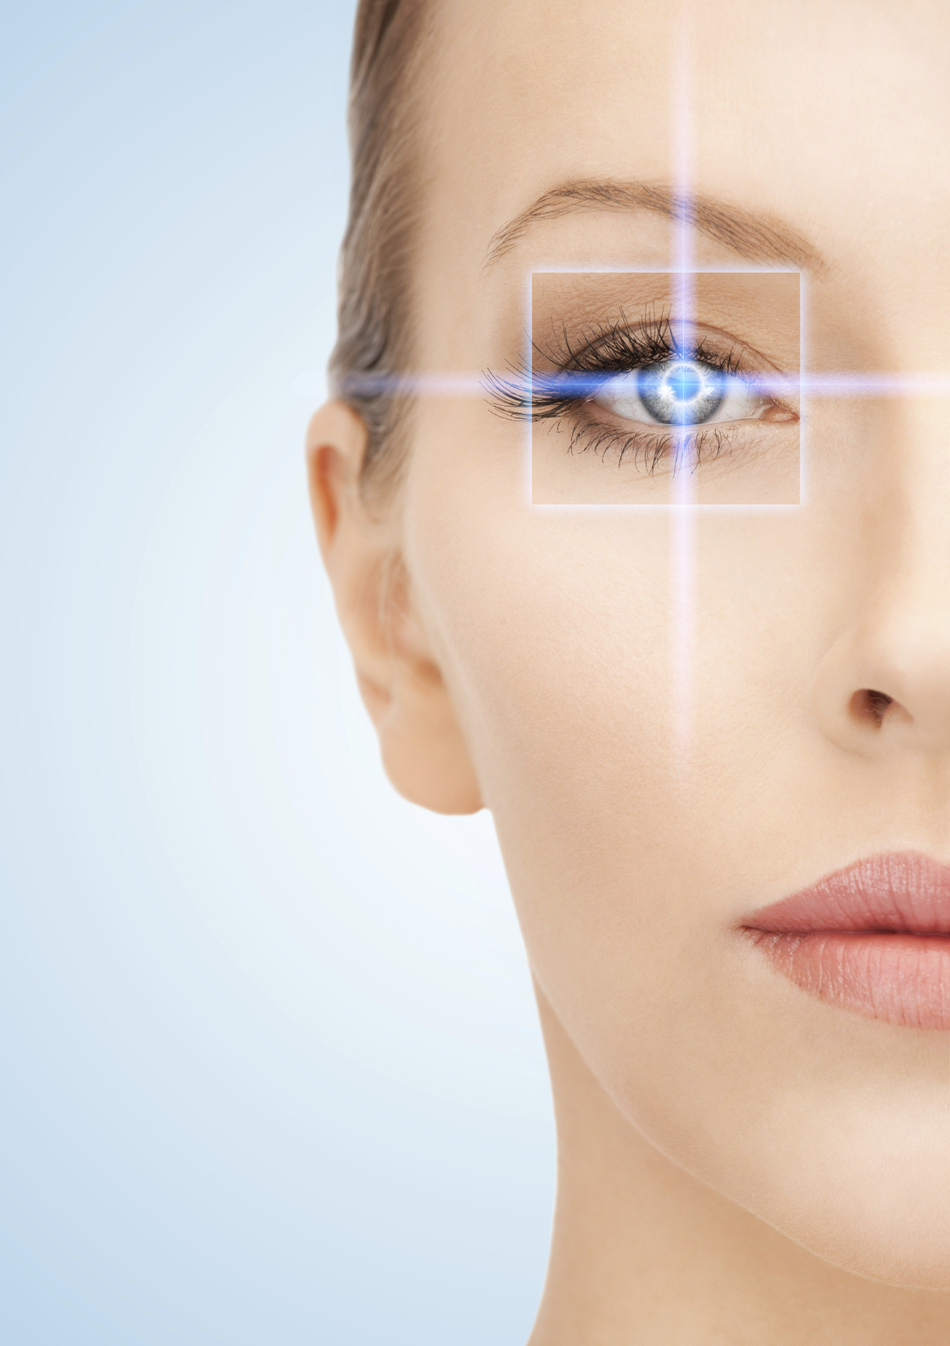 PRK: The Other Laser Surgery Option for Your Eyes